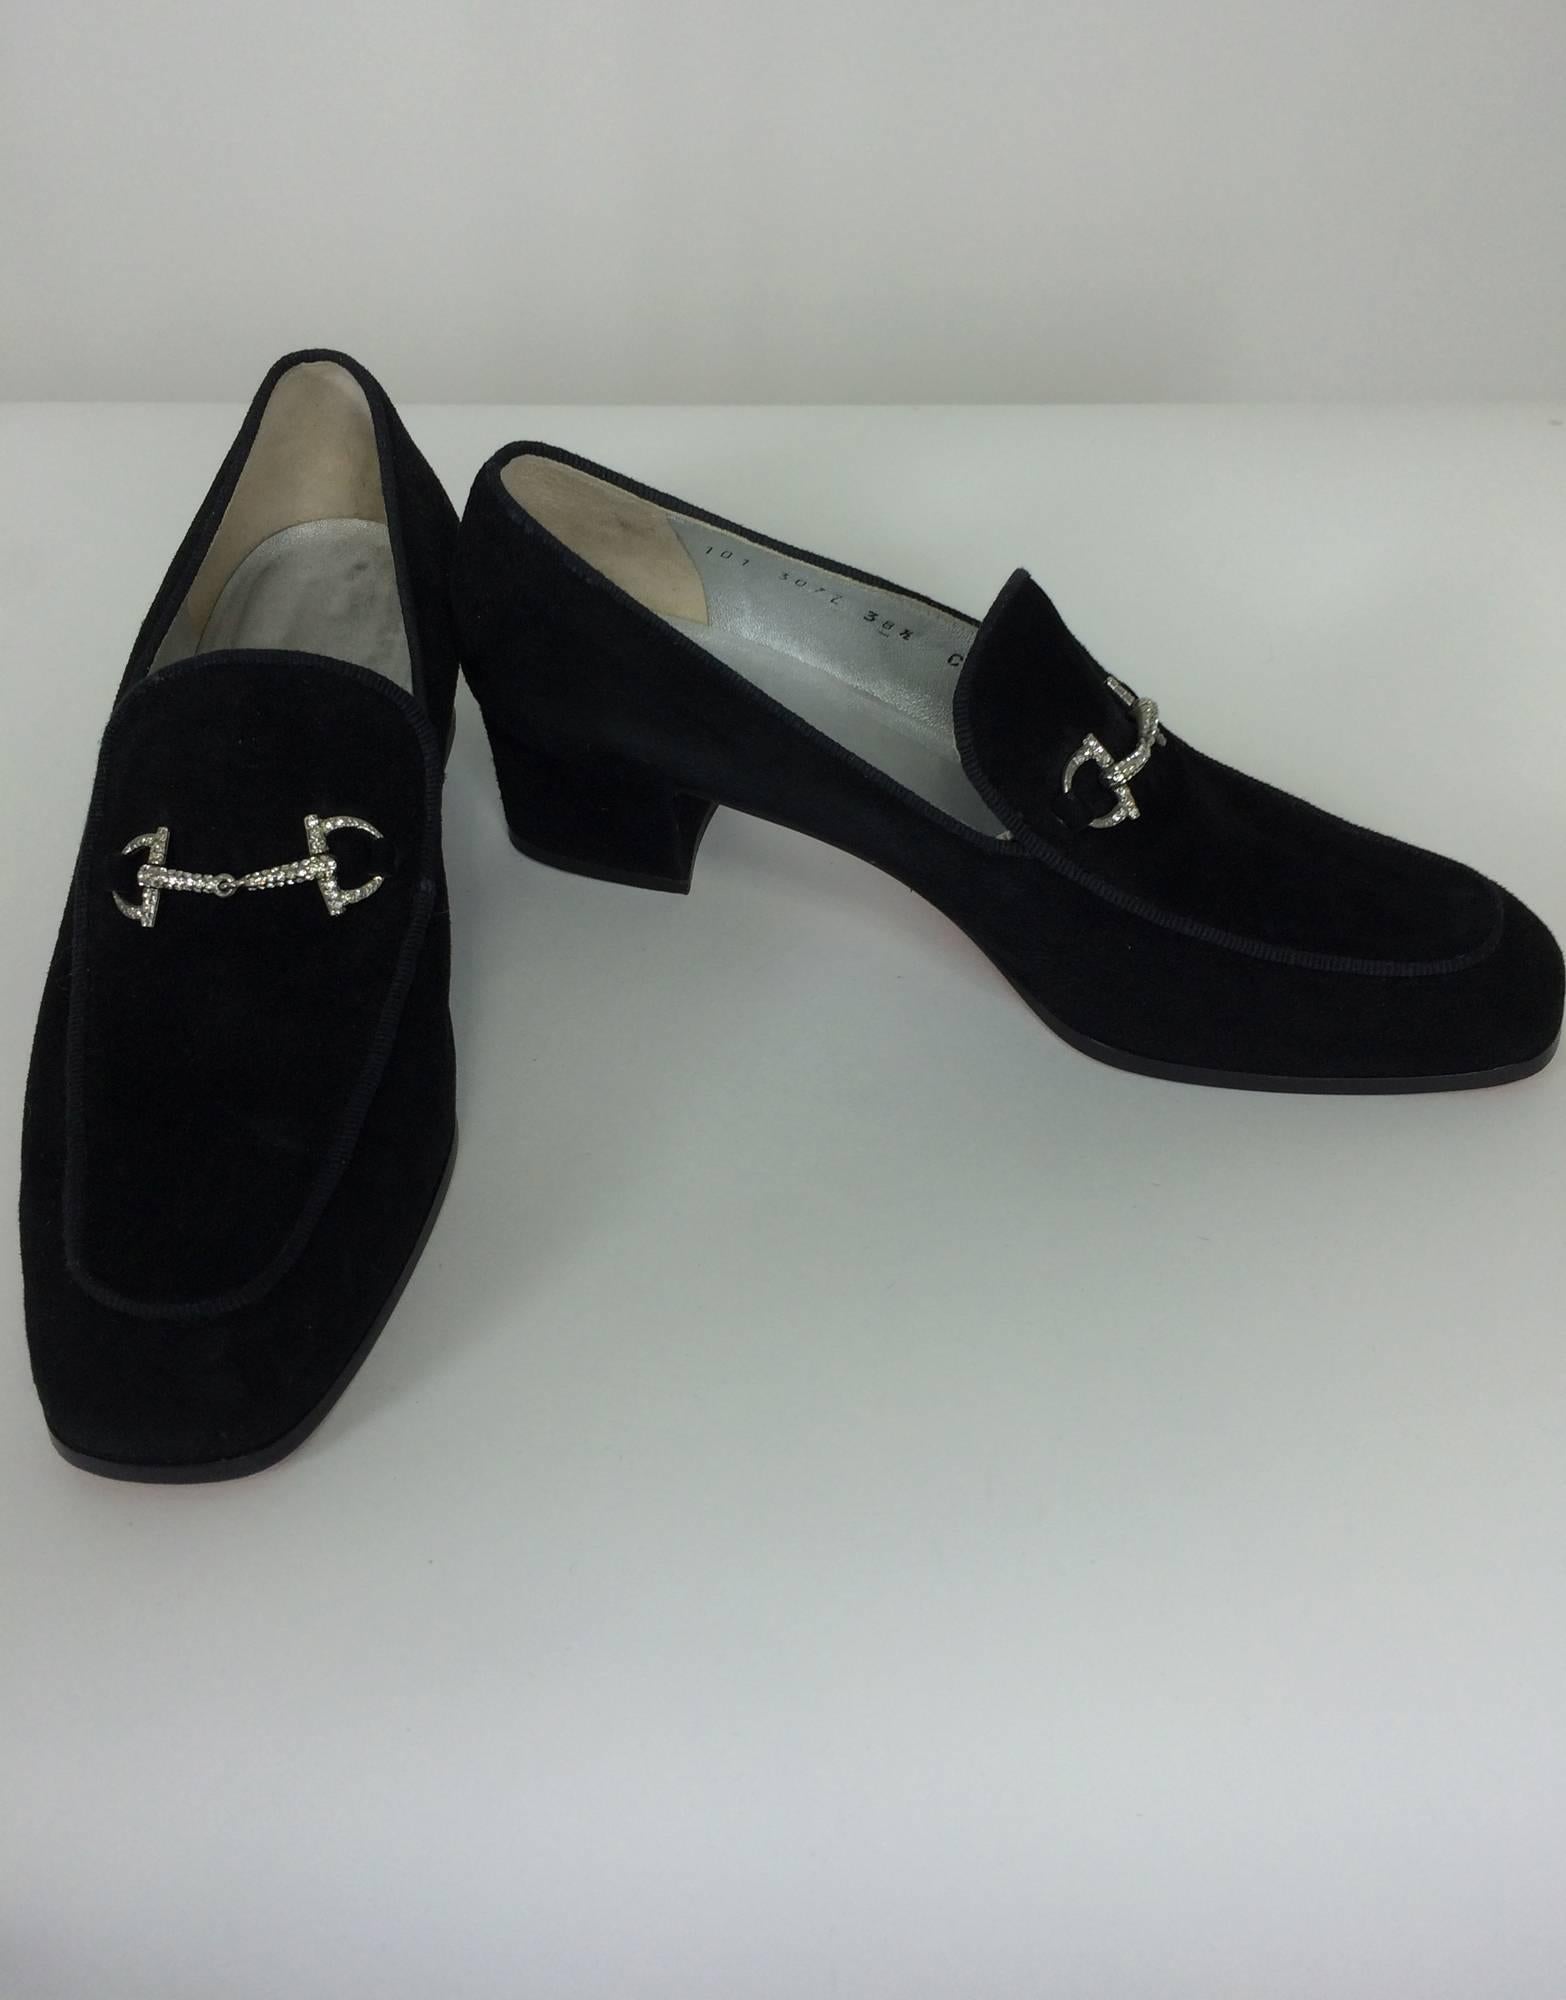 Gucci chunky black suede rhinestone bit loafers 38 1/2 C...Black suede with chunky heels, the fronts have silver horse bits set  with rhinestones...Lined in silver leather...Marked size 8 1/2 C...In excellent condition.